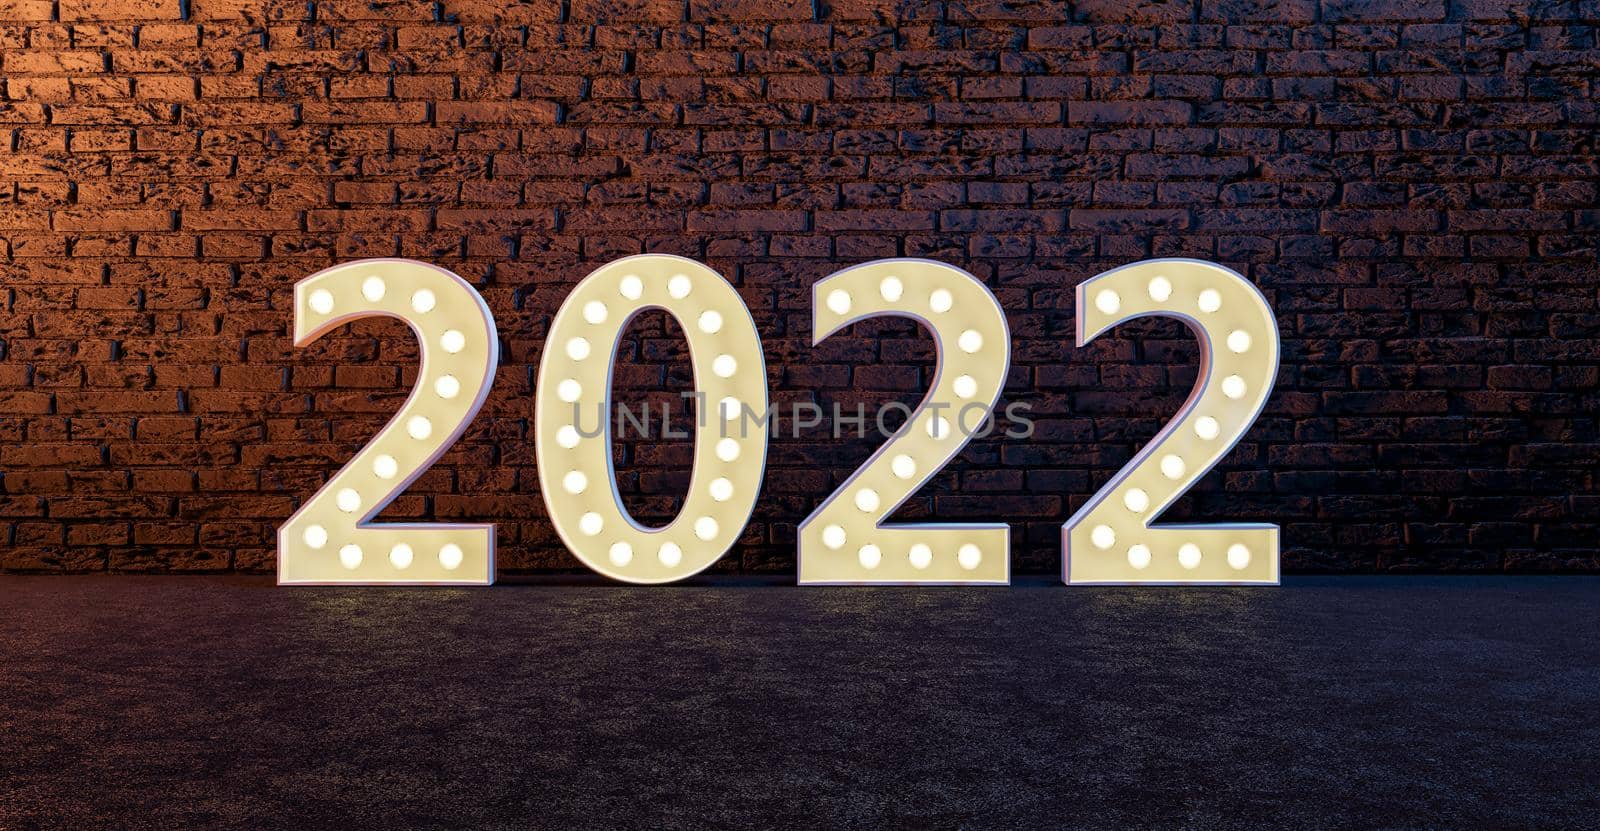 New year 2022 sign with lights bulbs on brick wall with warm lighting. 3d rendering